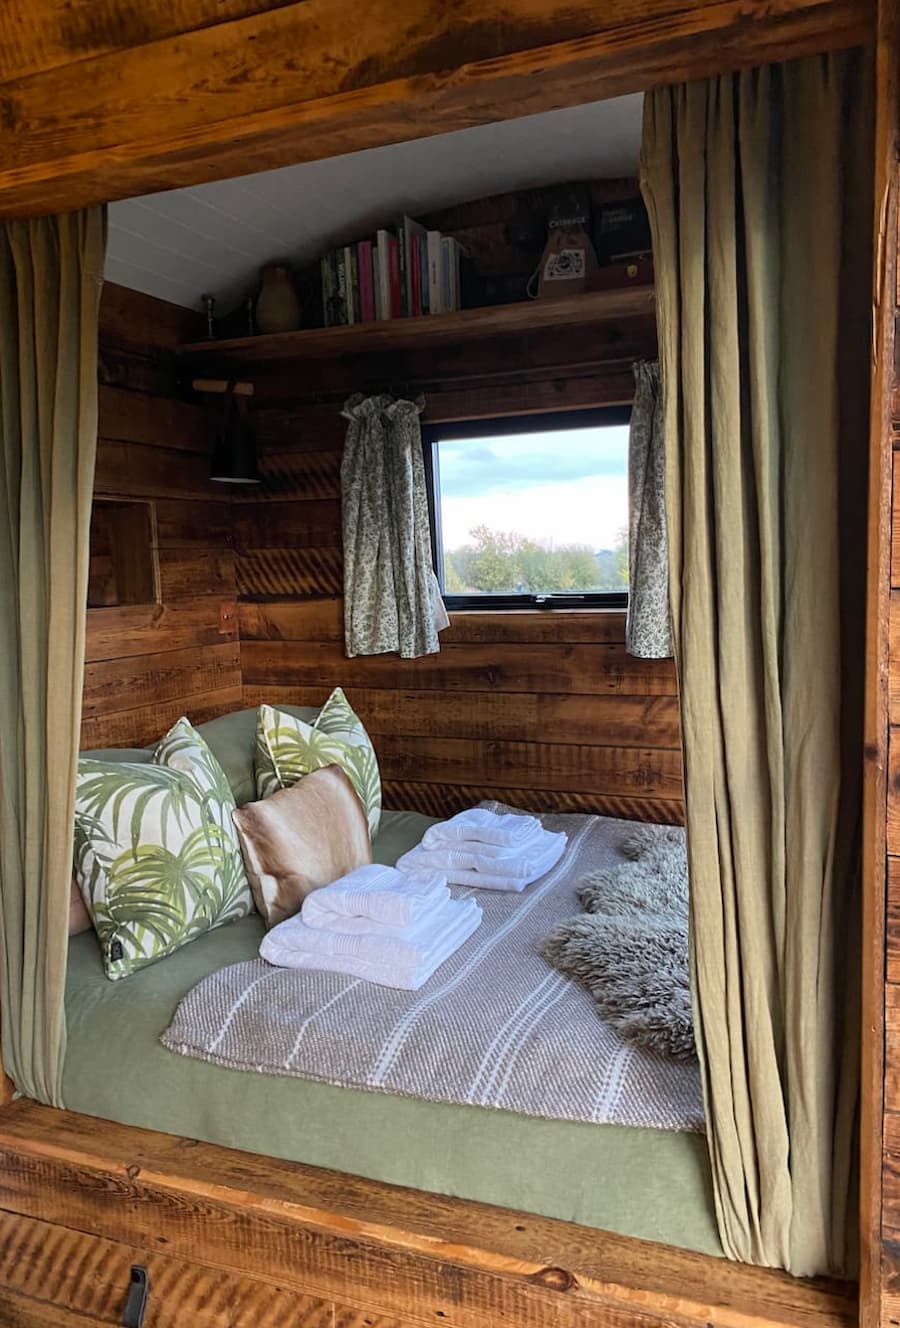 shepherds hut bed, which has been carefully considered